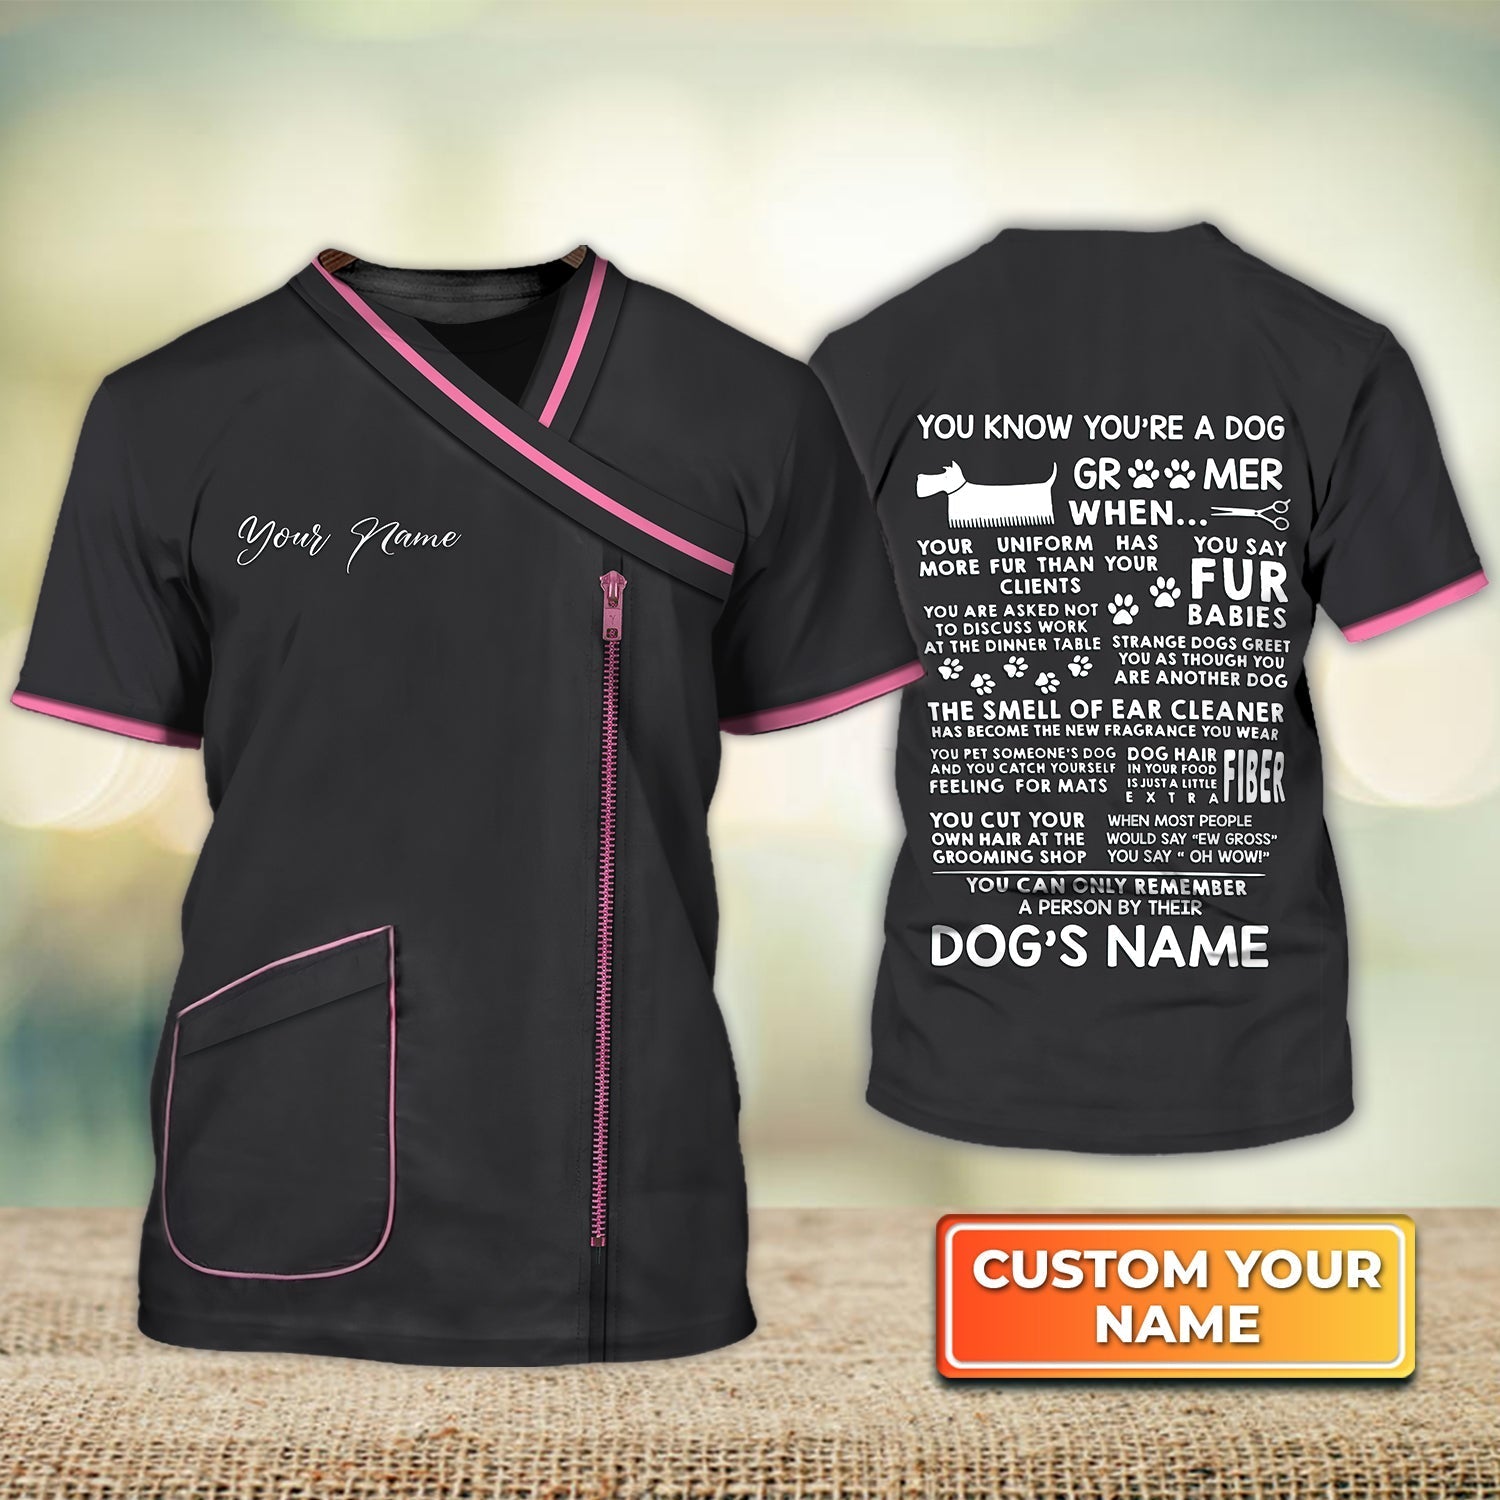 Personalized Name 3D Tshirt For Groomer Pet Groomer Uniform Black And Pink Salon Pet